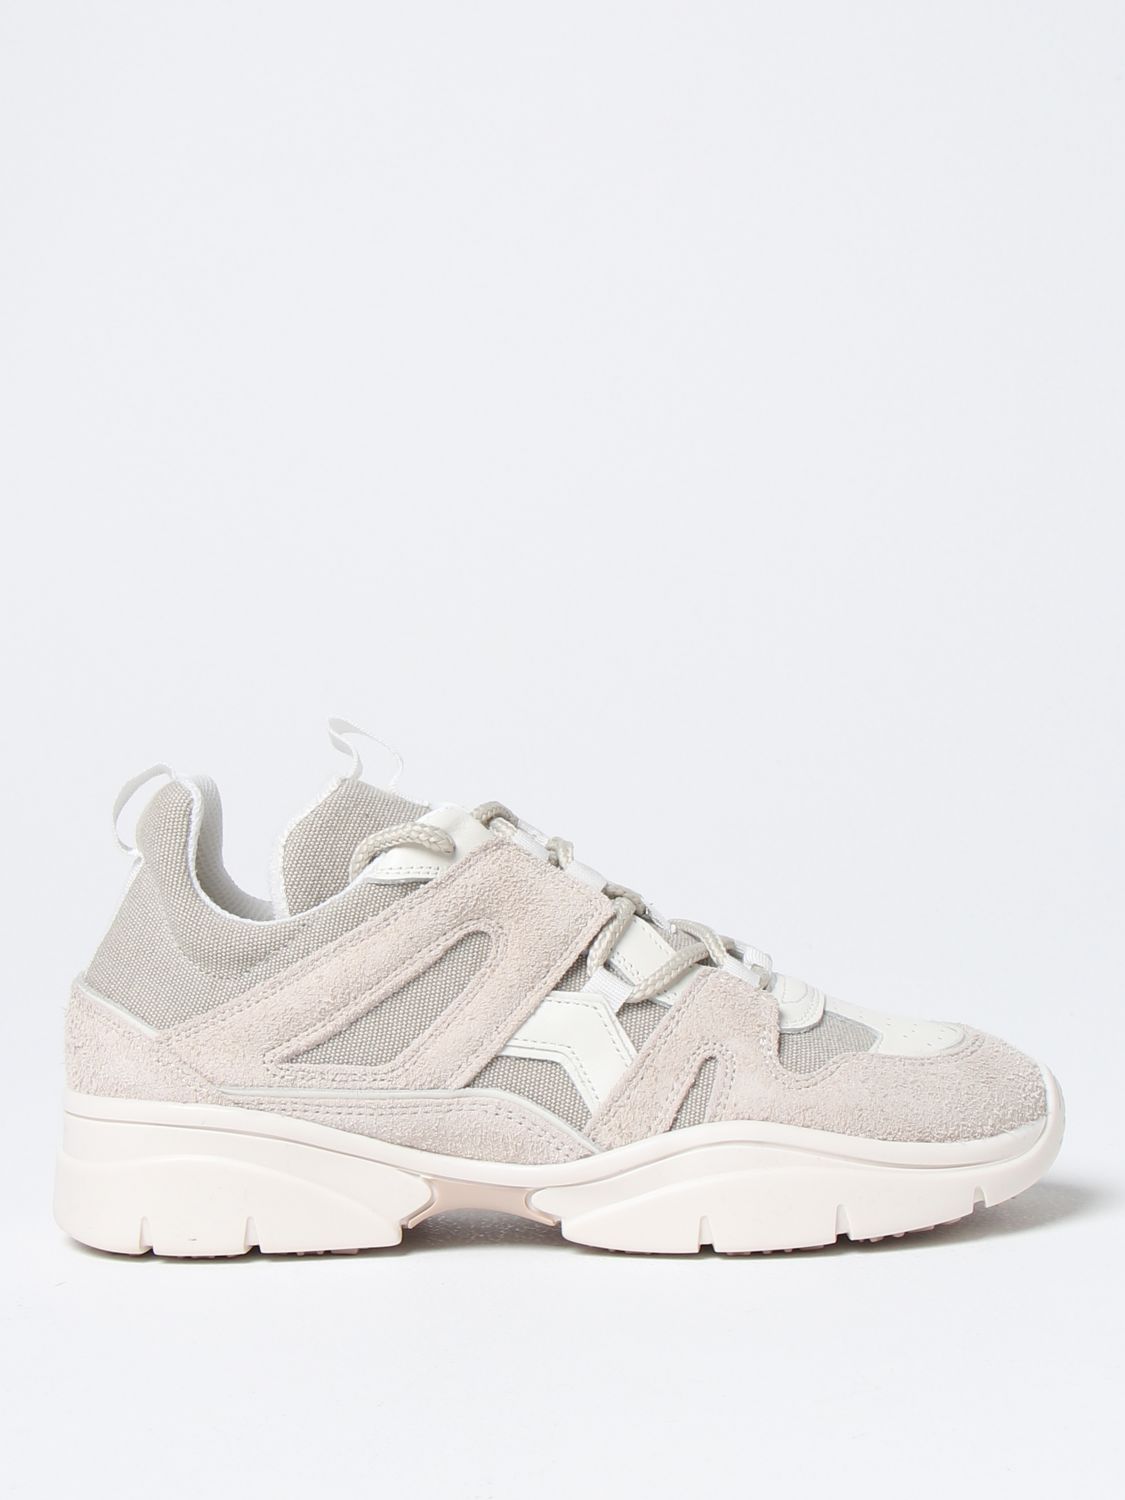 ISABEL sneakers for woman - Beige | Isabel Marant sneakers BK0016FAA1E81S online at GIGLIO.COM